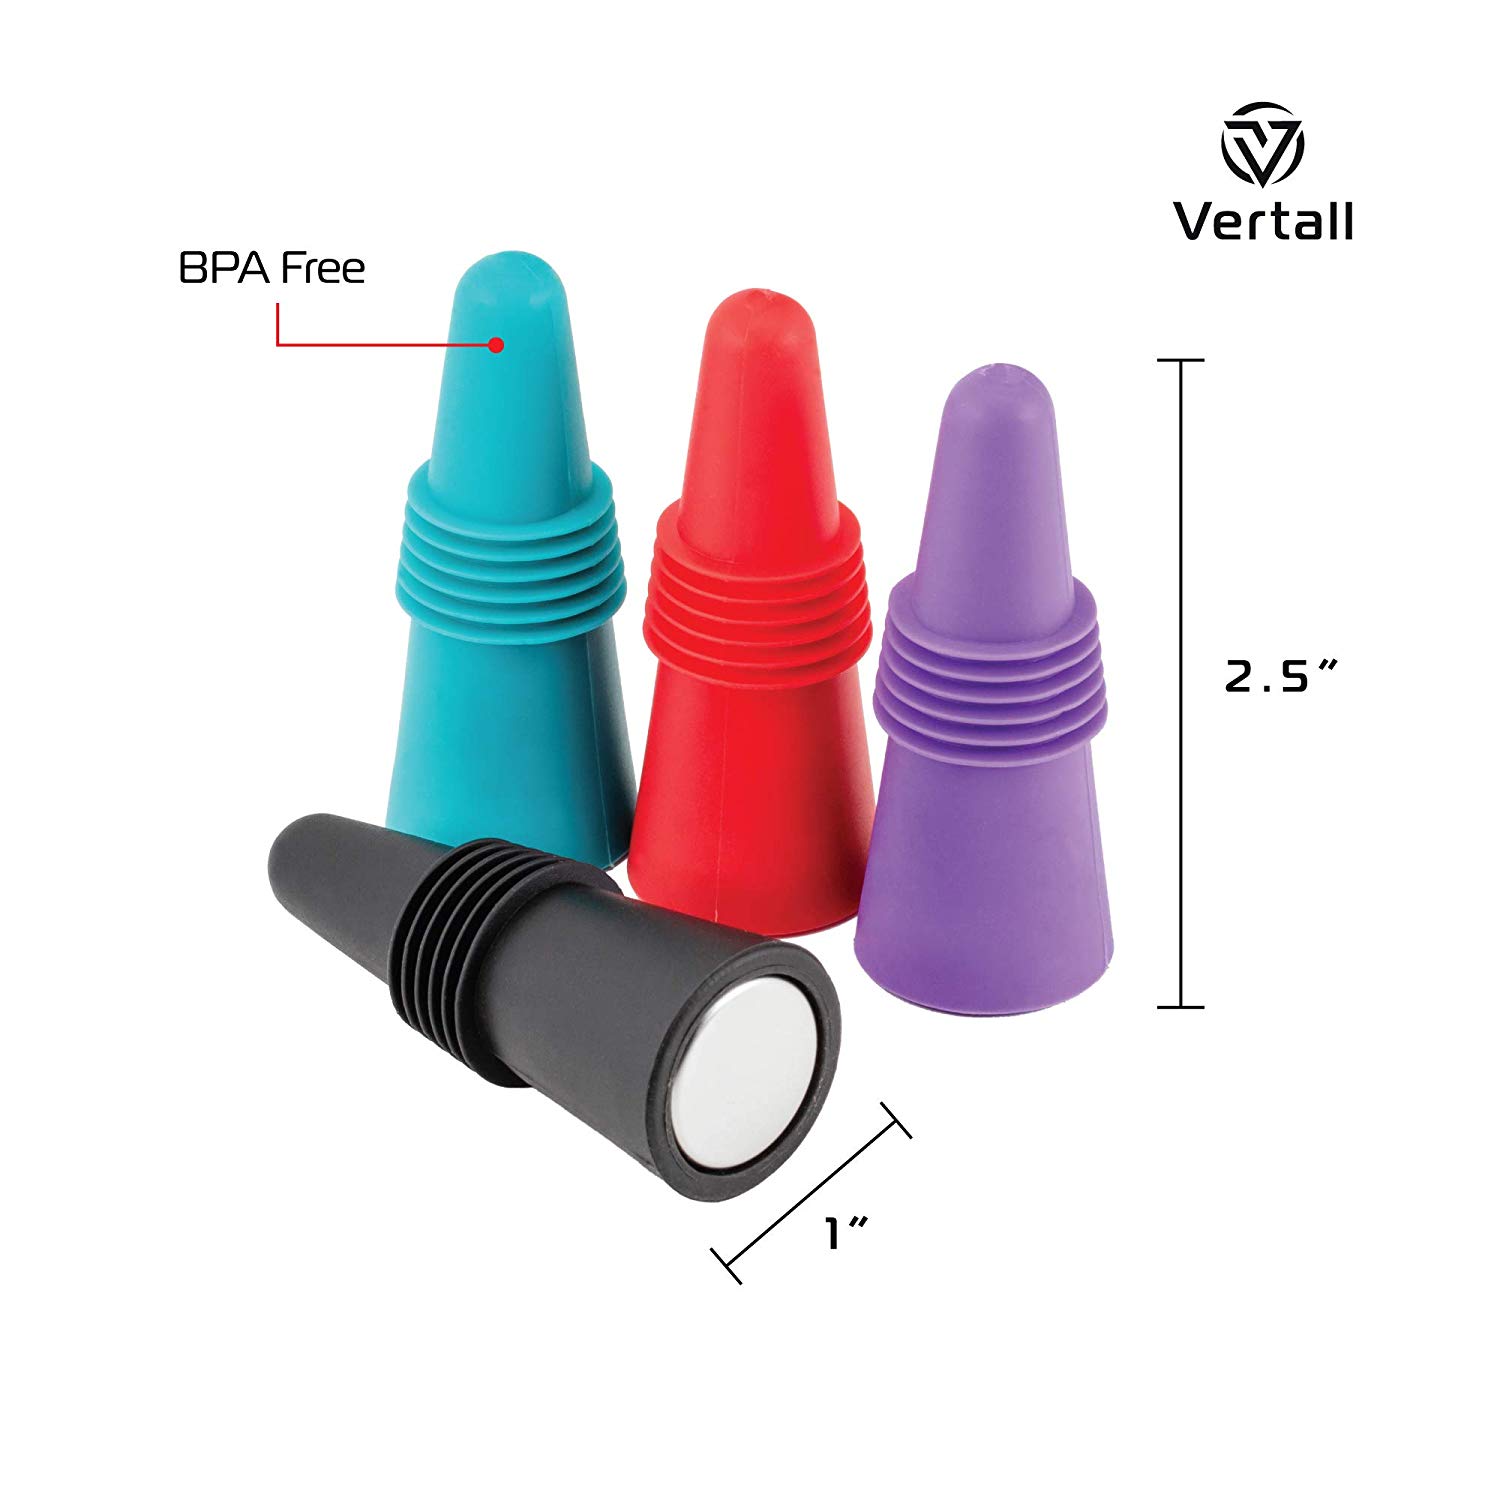 Wine Stoppers Premium Silicone Beverage Bottle Stoppers by Vertall (Assorted Colors, Set of 4) - image 3 of 5